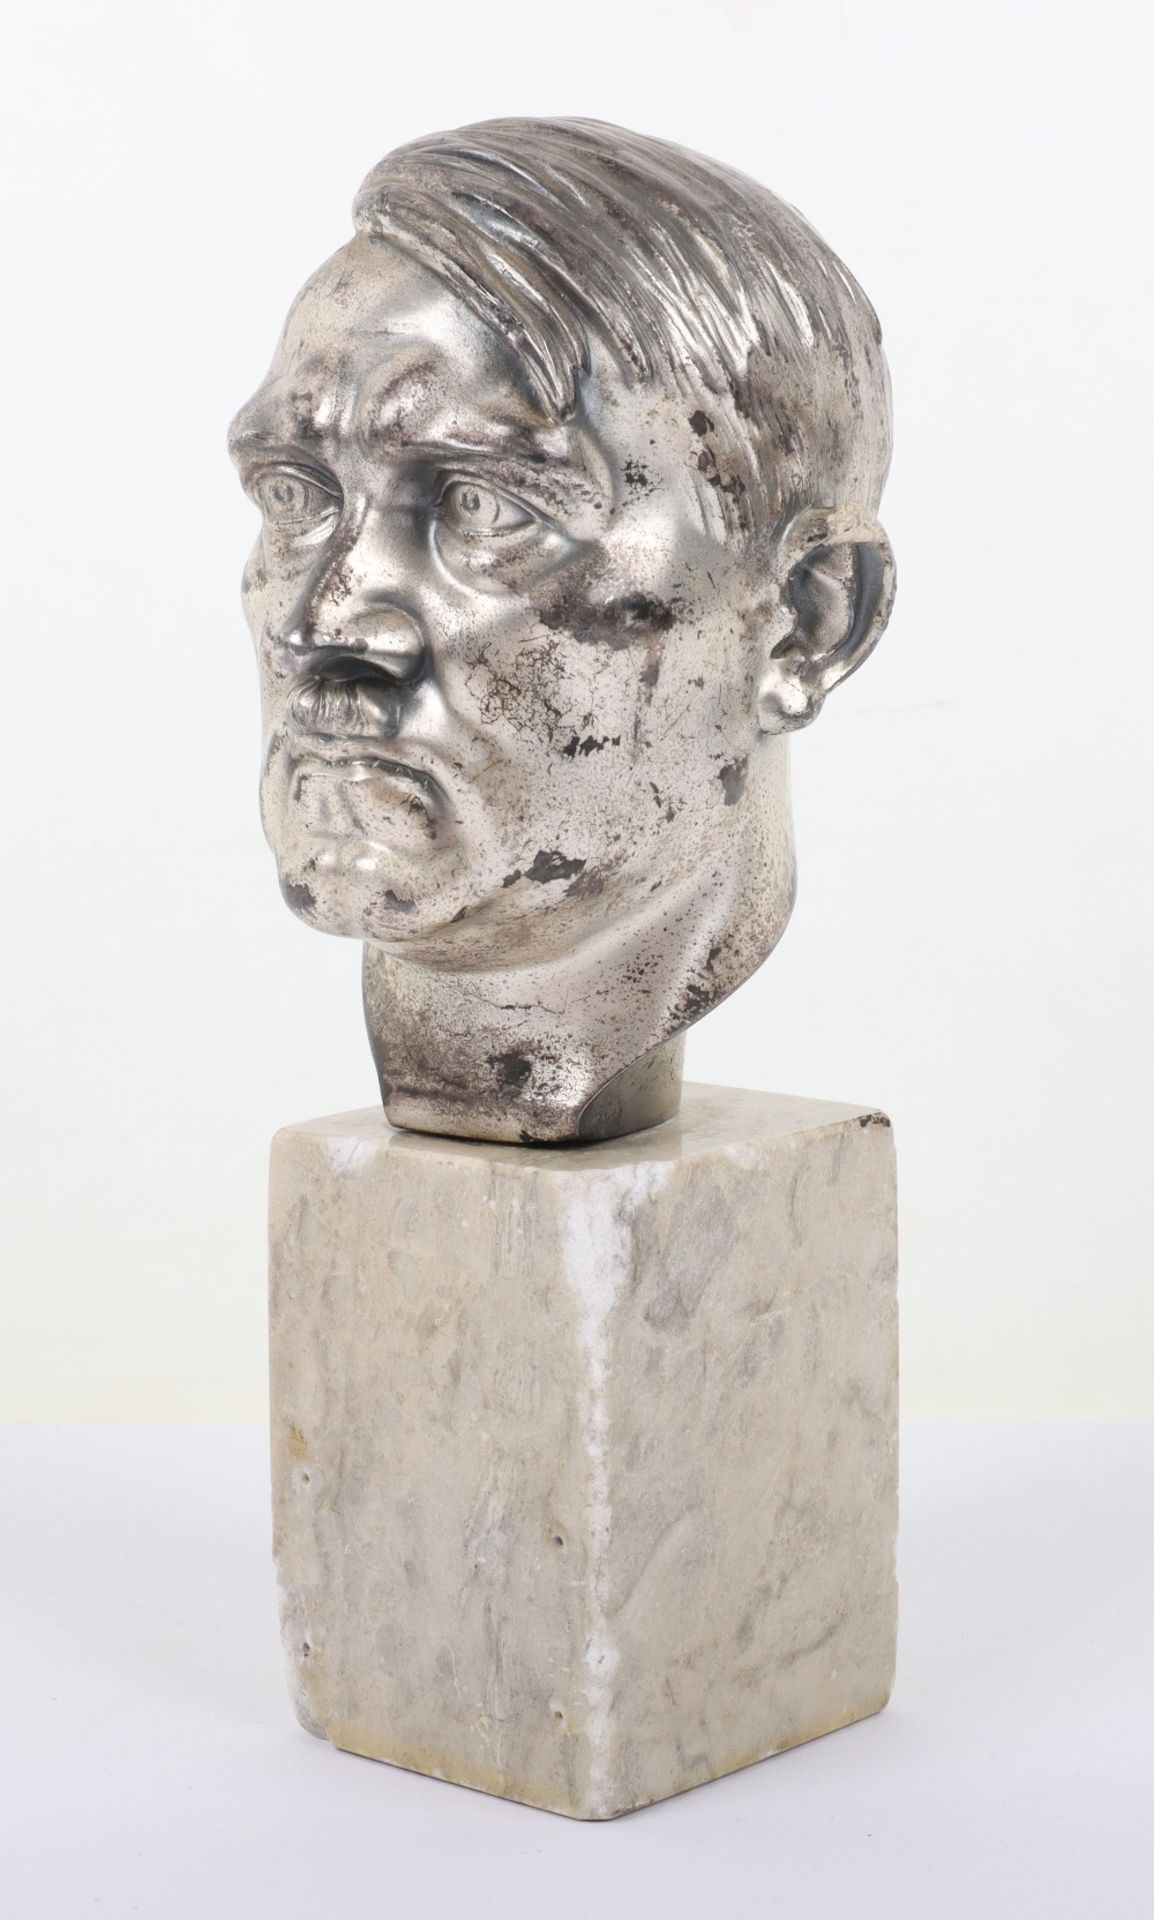 Third Reich Adolf Hitler Table Bust - Image 5 of 6